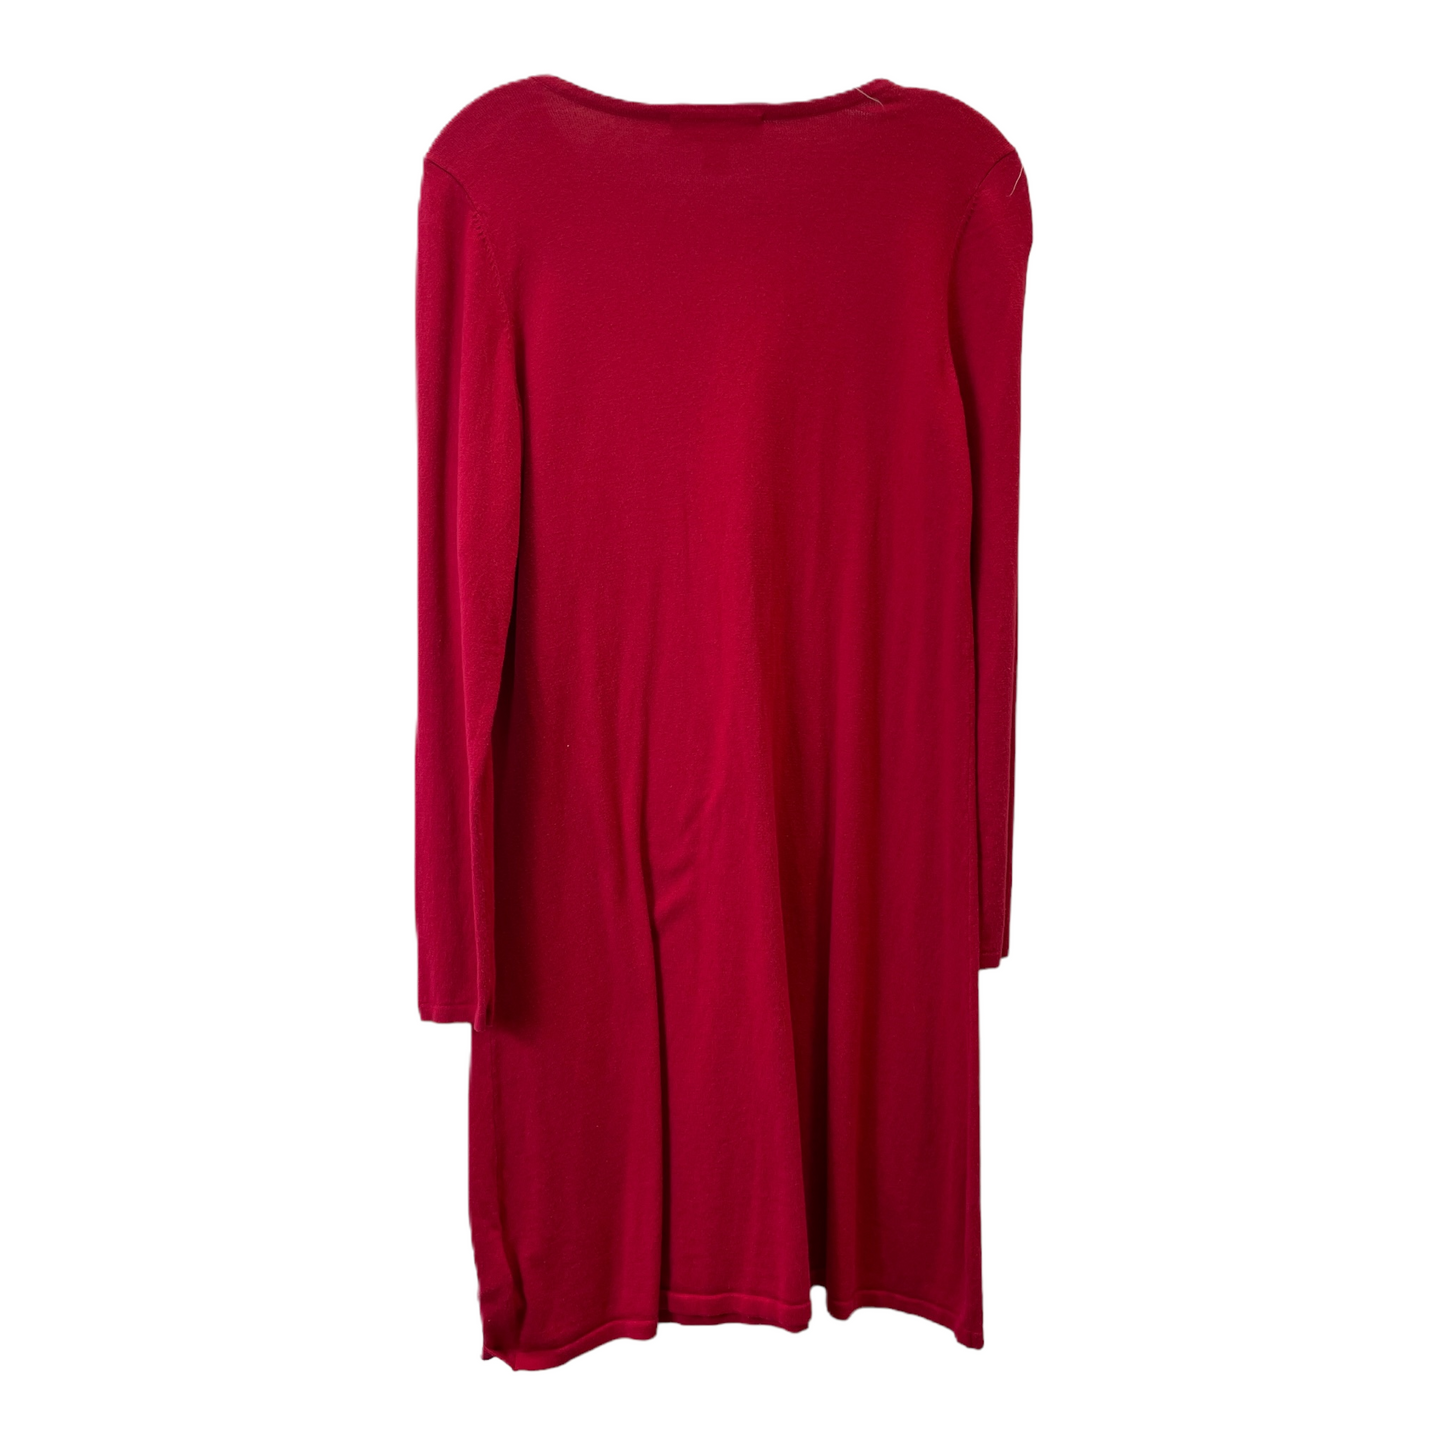 Magenta Dress Casual Short By Michael By Michael Kors, Size: M